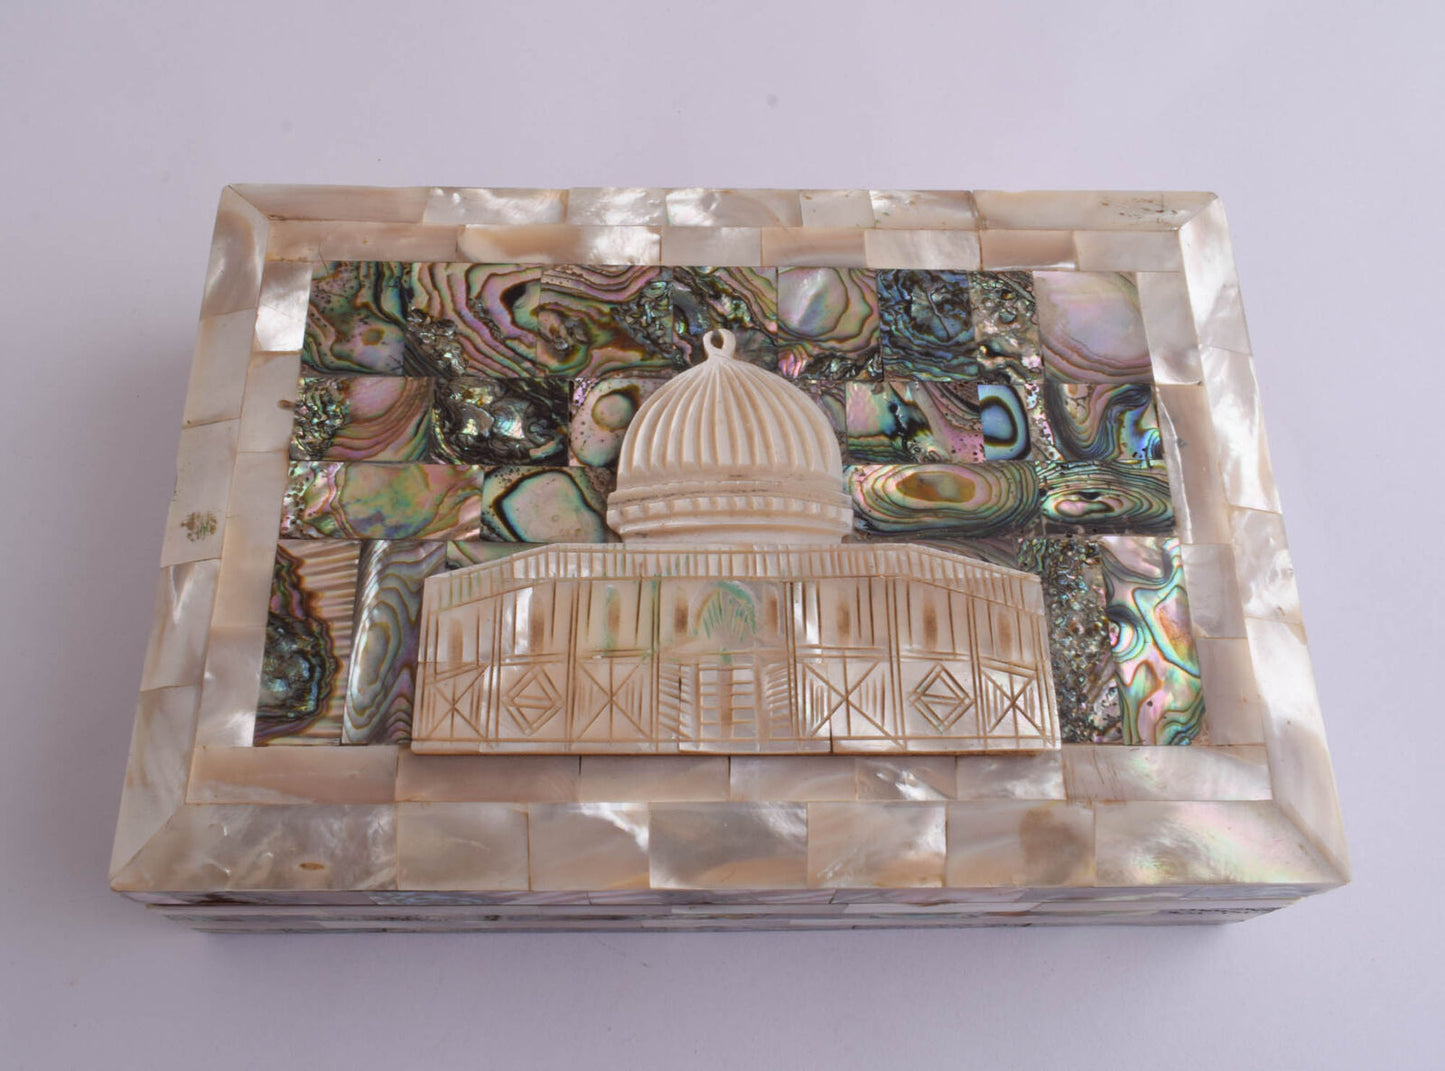 Vintage Islamic Quran Koran Box-Dome of the Rock- Mother of Pearl-Carved-Inlays